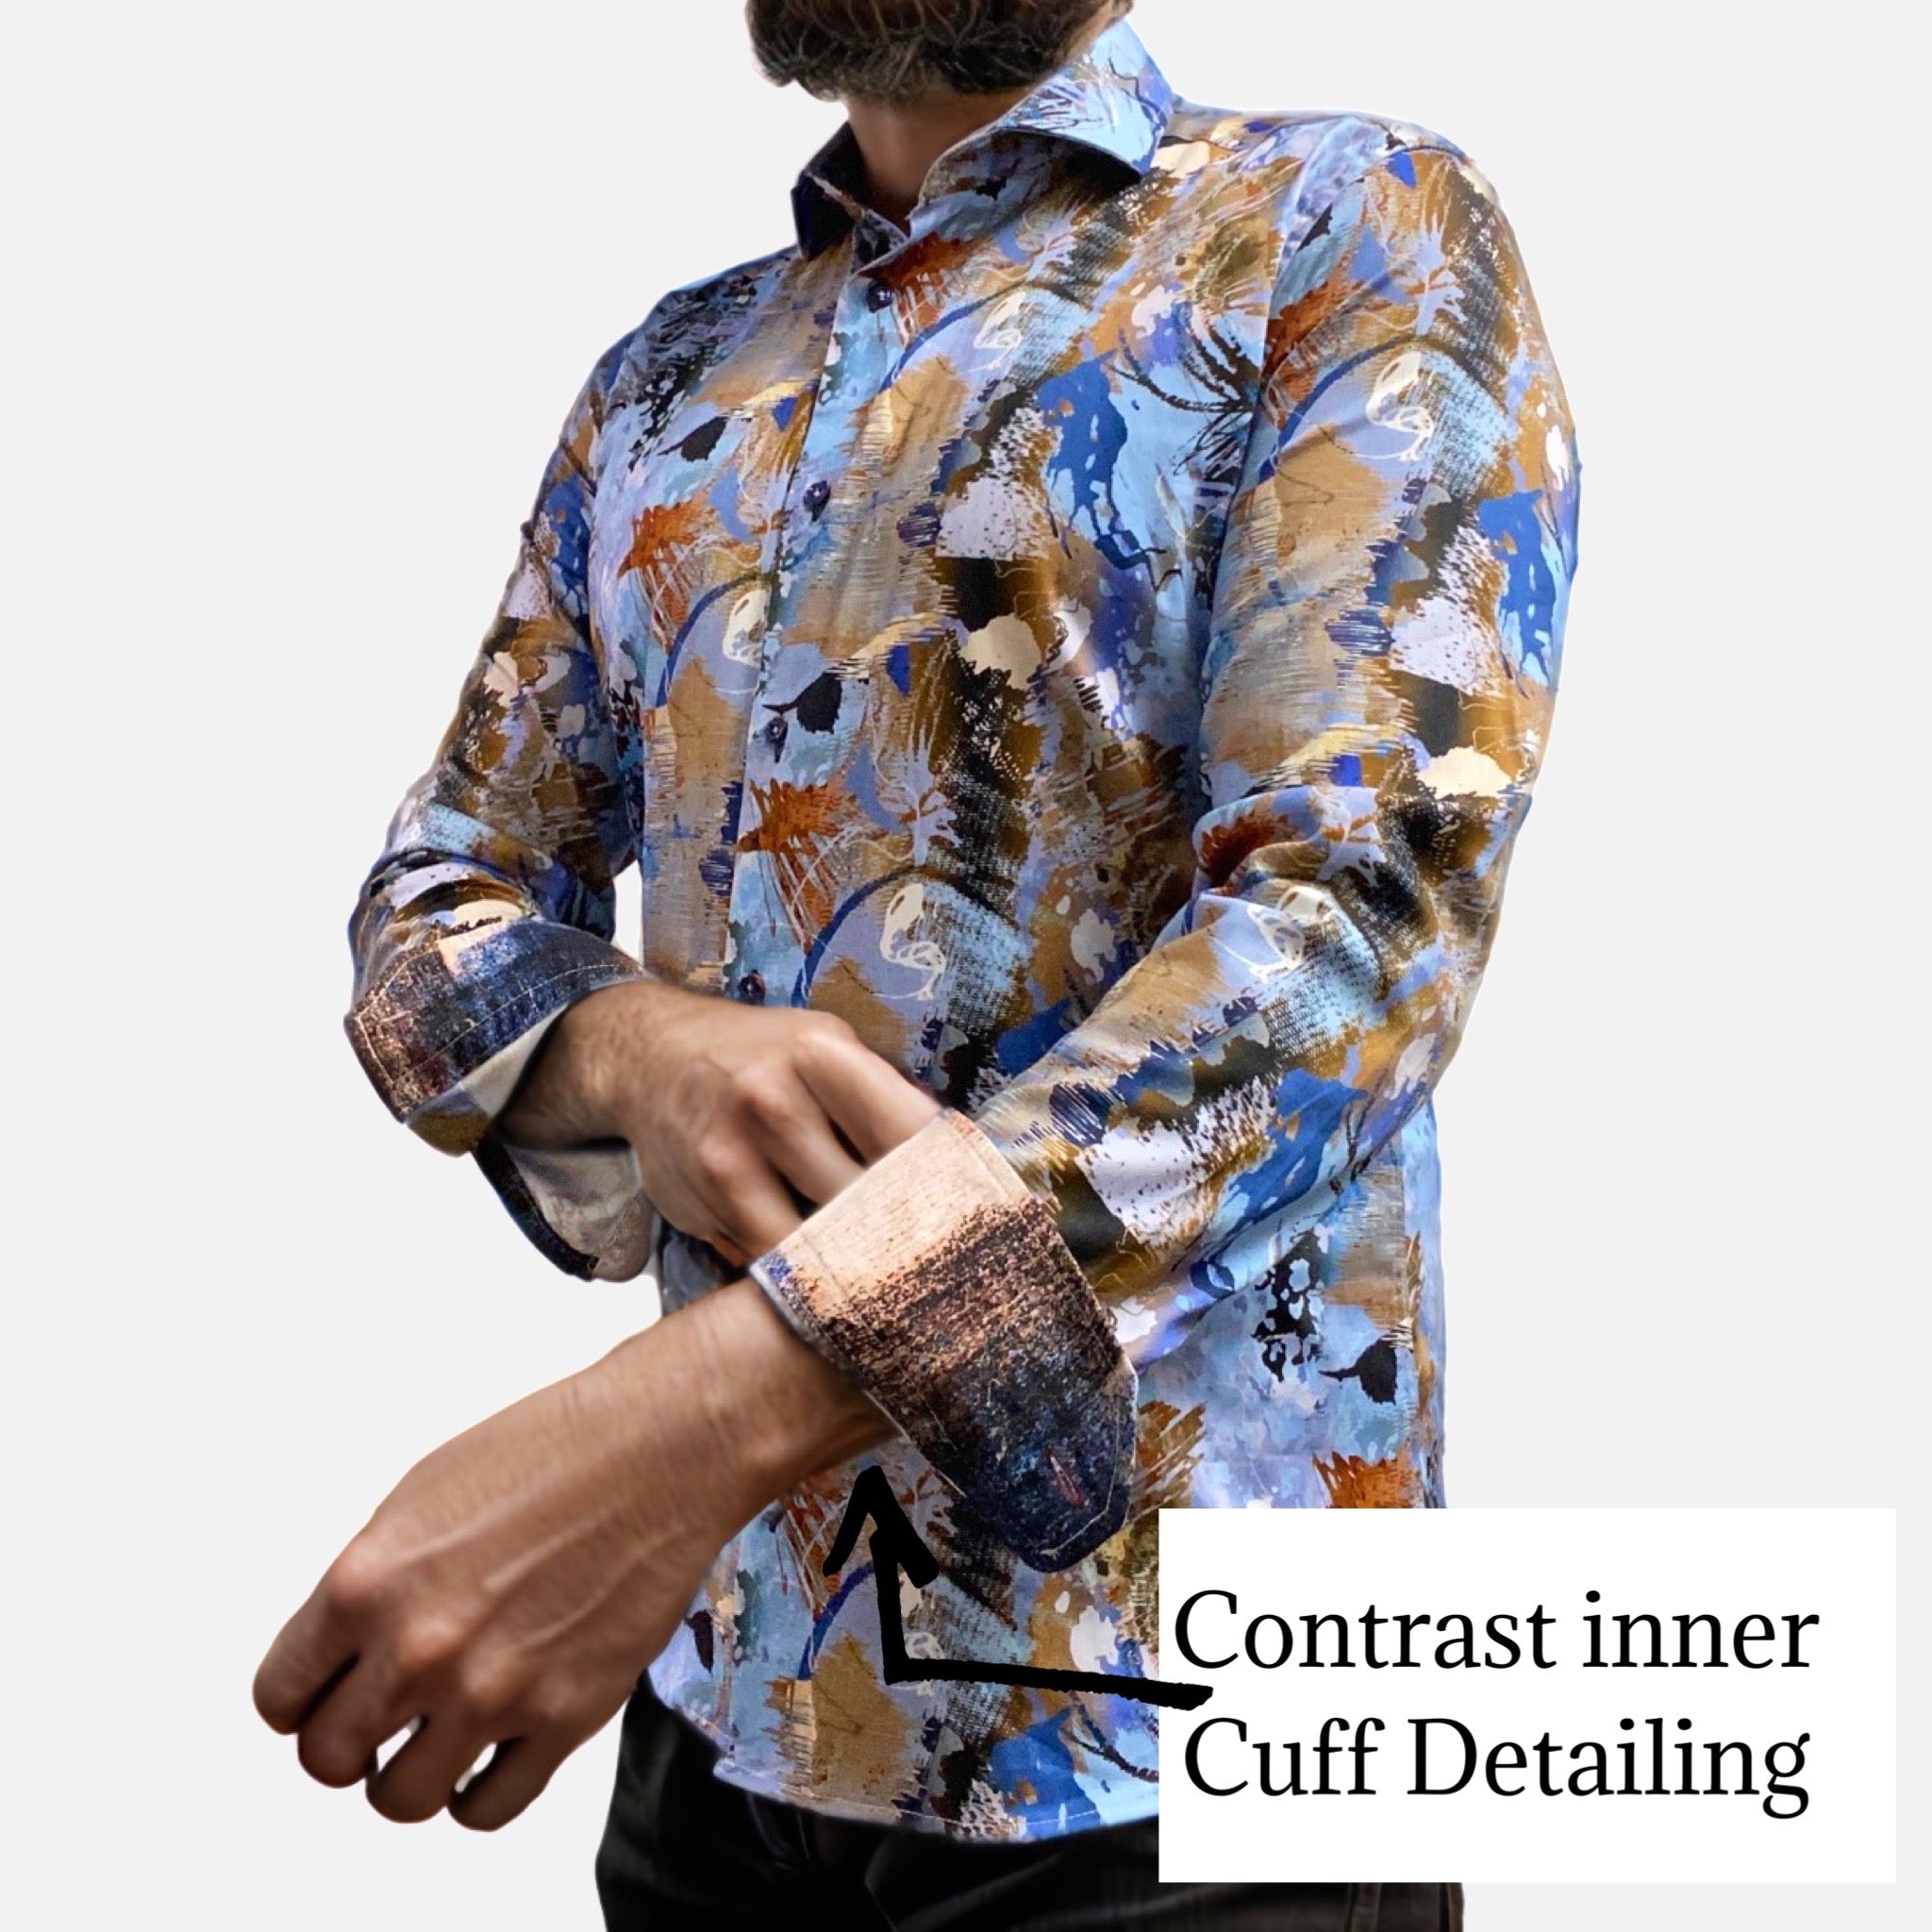 7 downie st shirt with contrast inner cuff